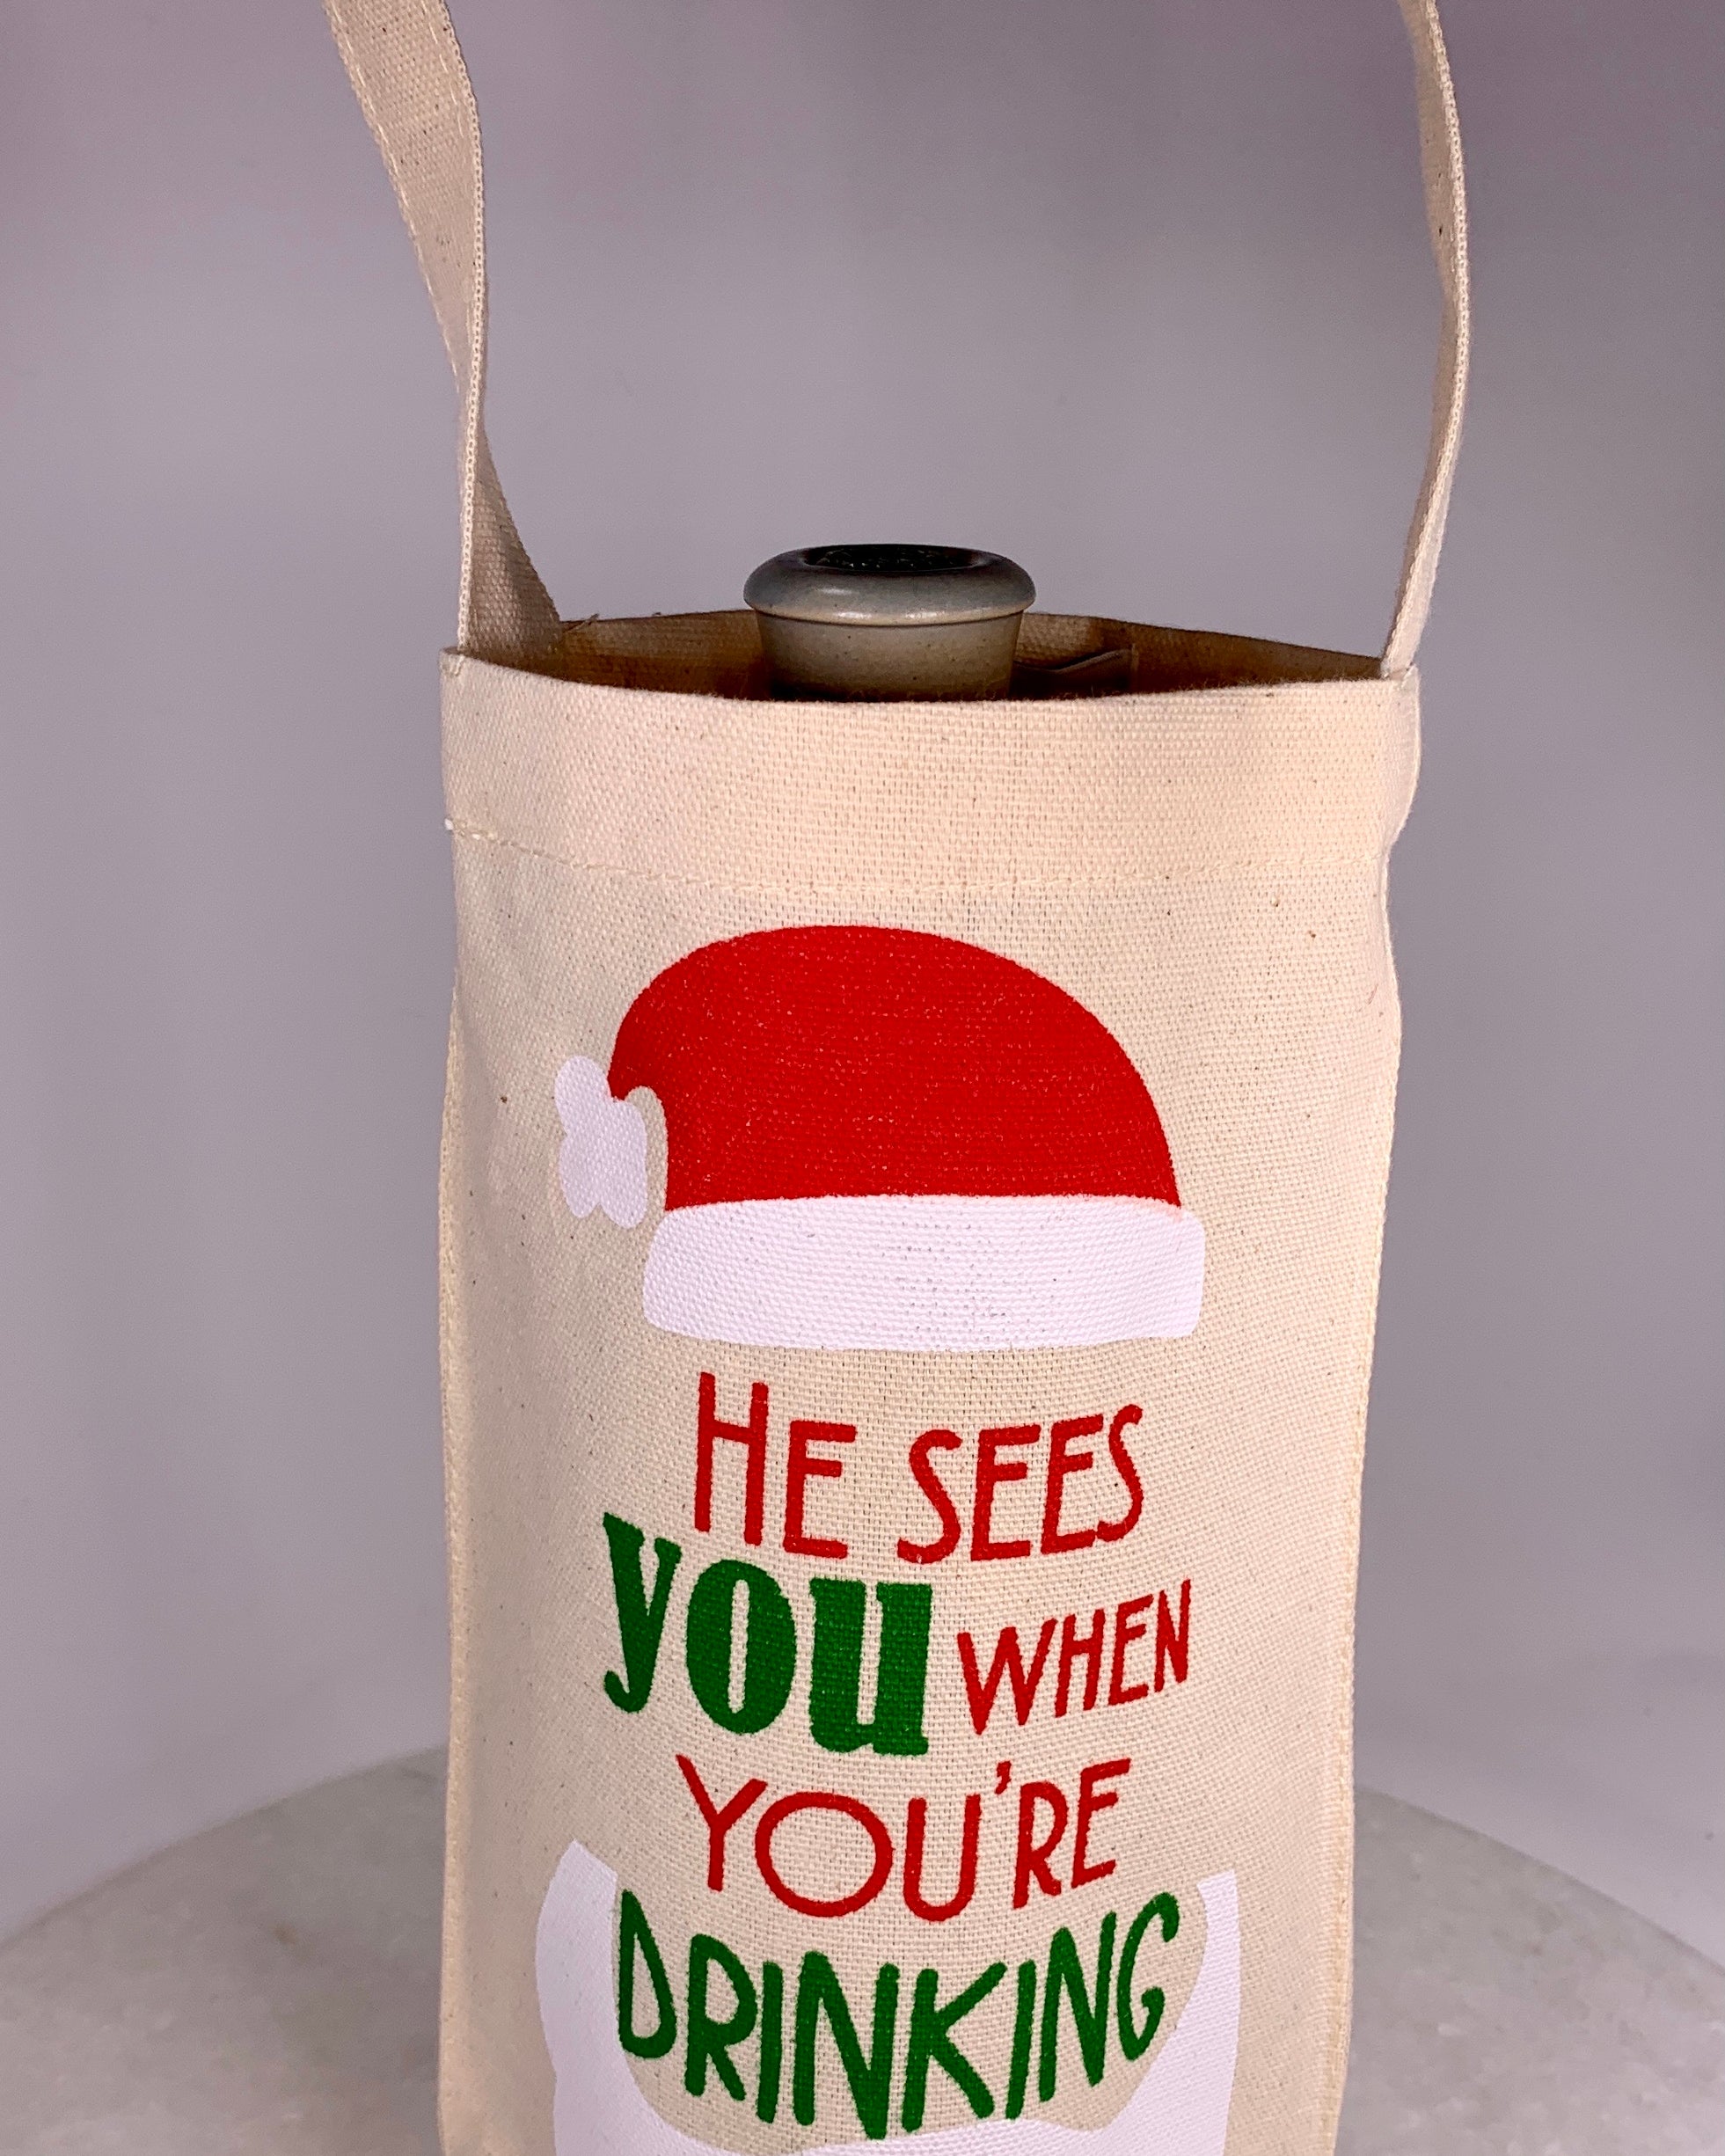 “He sees you when you’re drinking” Bottle Bag.